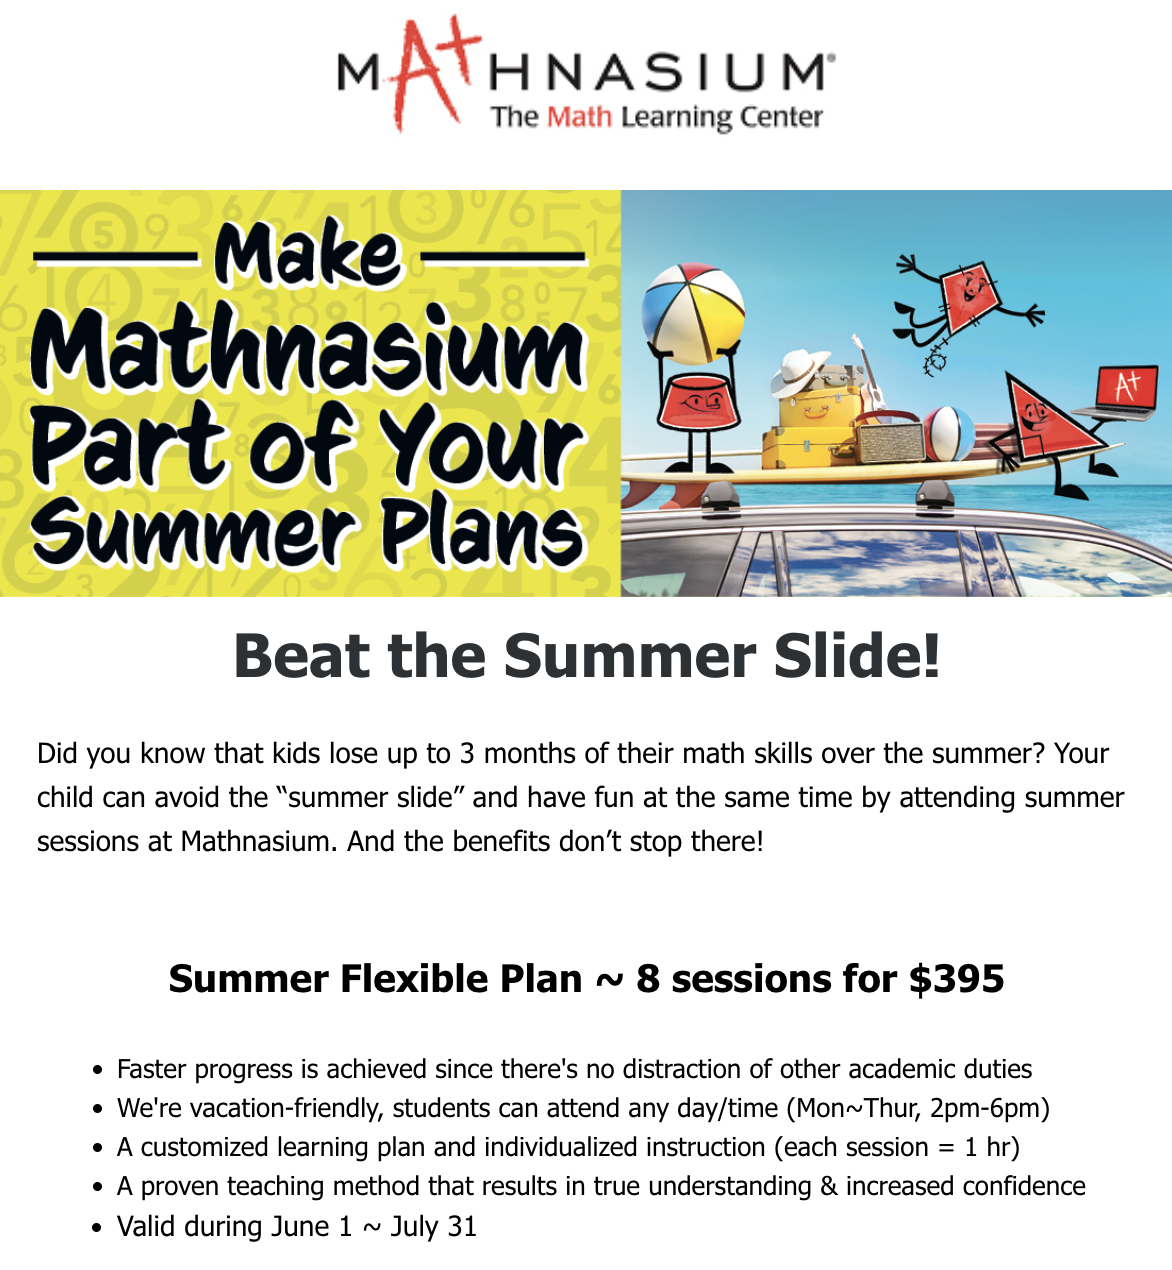 Summer Flexible Plan ~ 8 sessions for $395